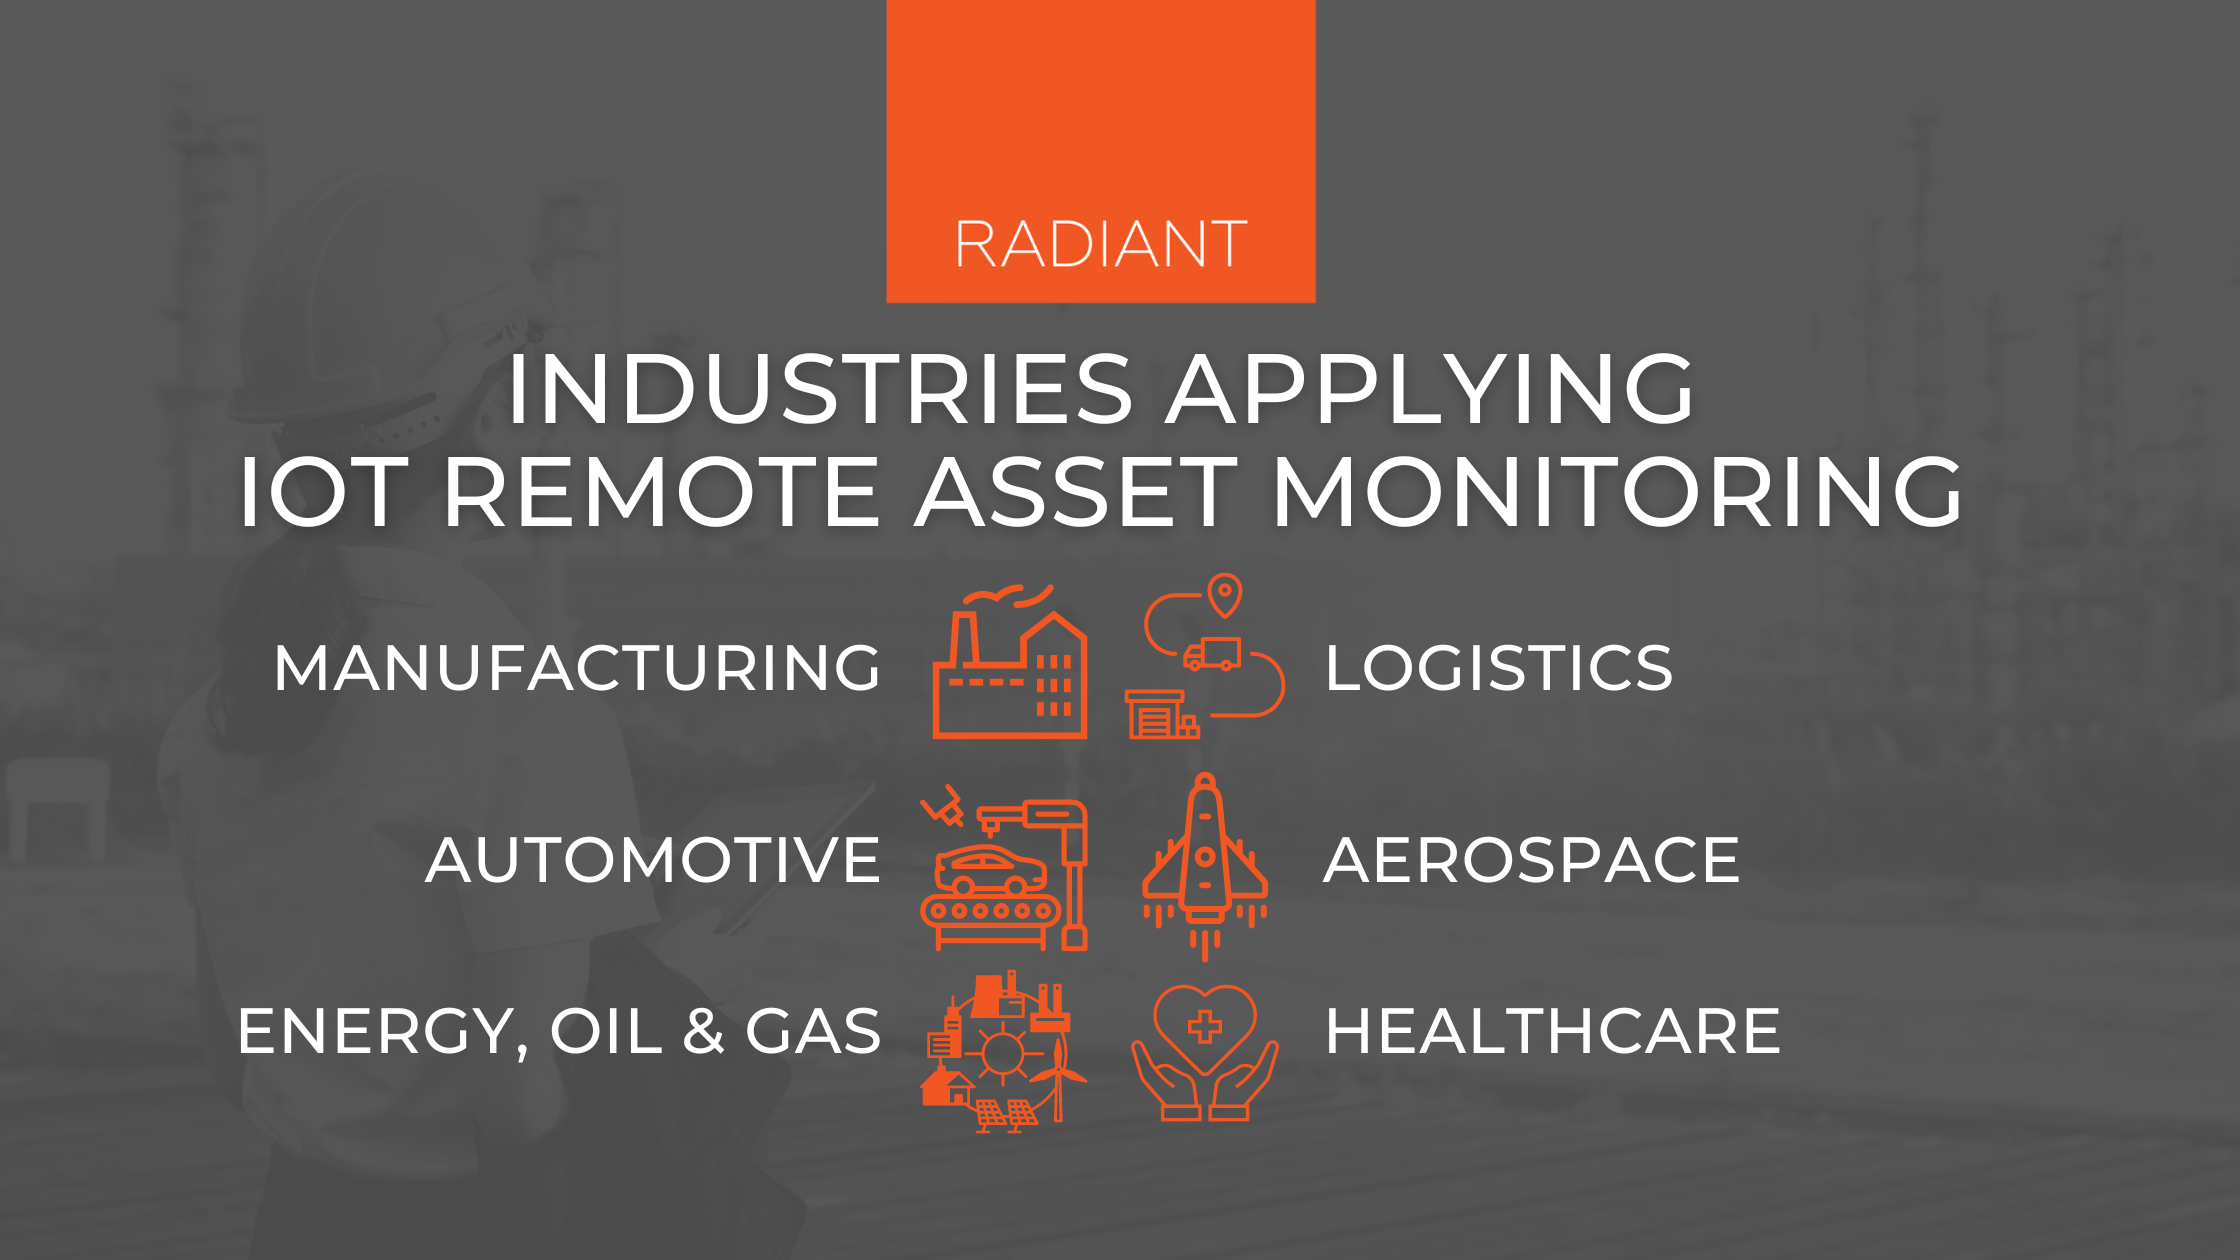 IoT Remote Asset Monitoring Solution - Remote Asset Monitoring Solution - IoT Remote Asset Monitoring - Remote Asset Monitoring Solutions - Asset Monitoring Solution - Asset Monitoring Solutions - Remote Asset Management Solution - Remote Asset Management Solutions - Remote Asset Tracking Solution - Remote Asset Tracking Solutions - Remote Asset Management - Remote Asset Tracking - IoT Asset Tracking - IoT Asset Management - Asset Maintenance Management